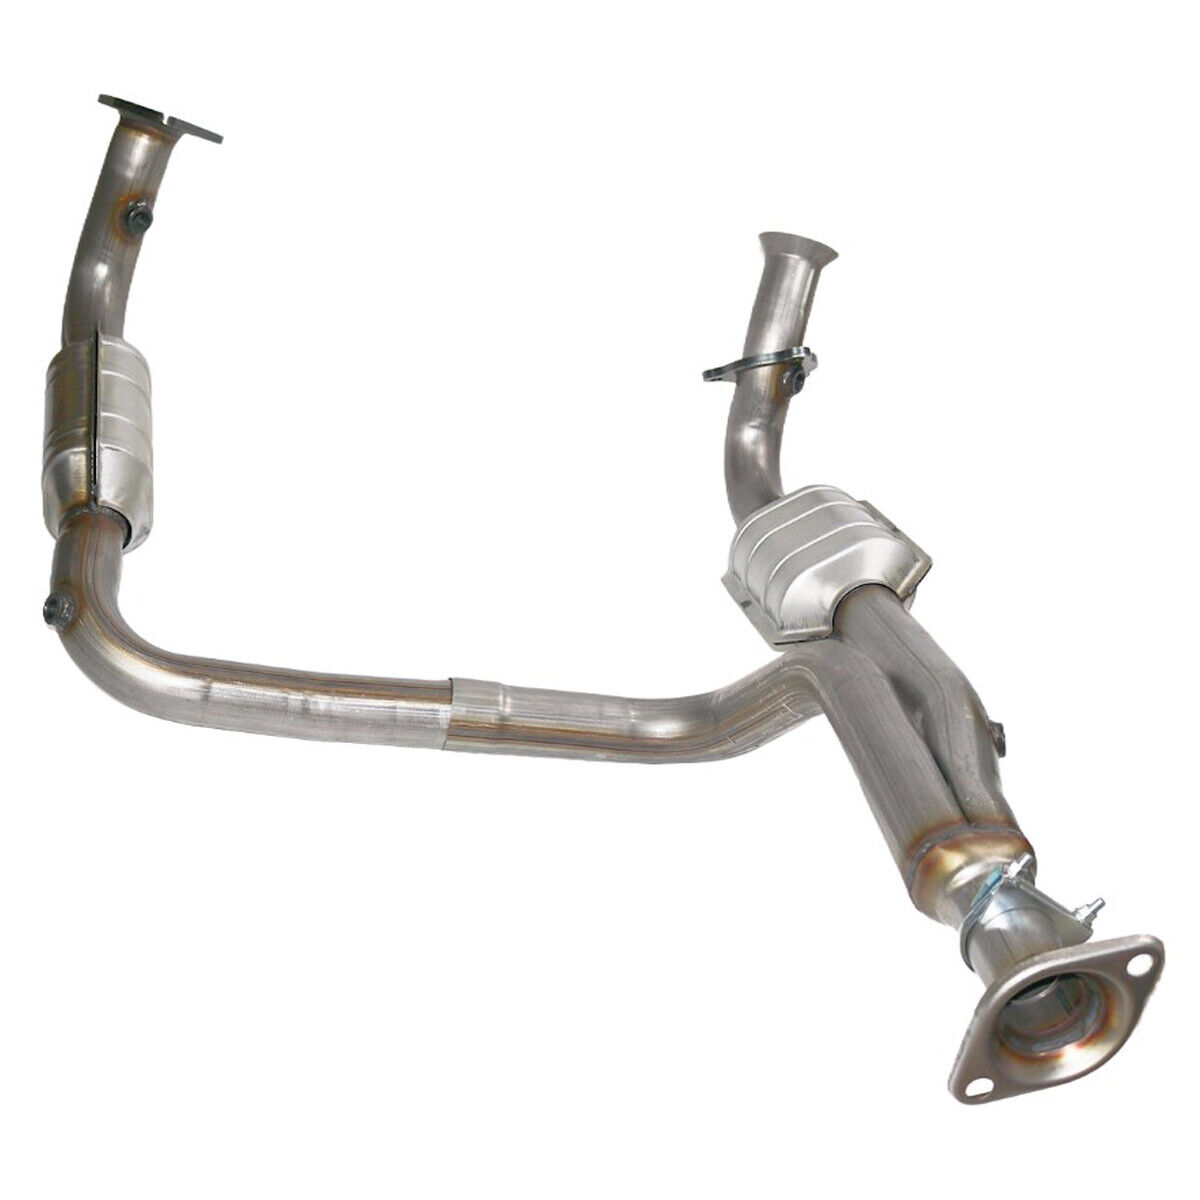 For Chevy Silverado 1500 1999-2006 Y Pipe Catalytic Converter EPA Approved